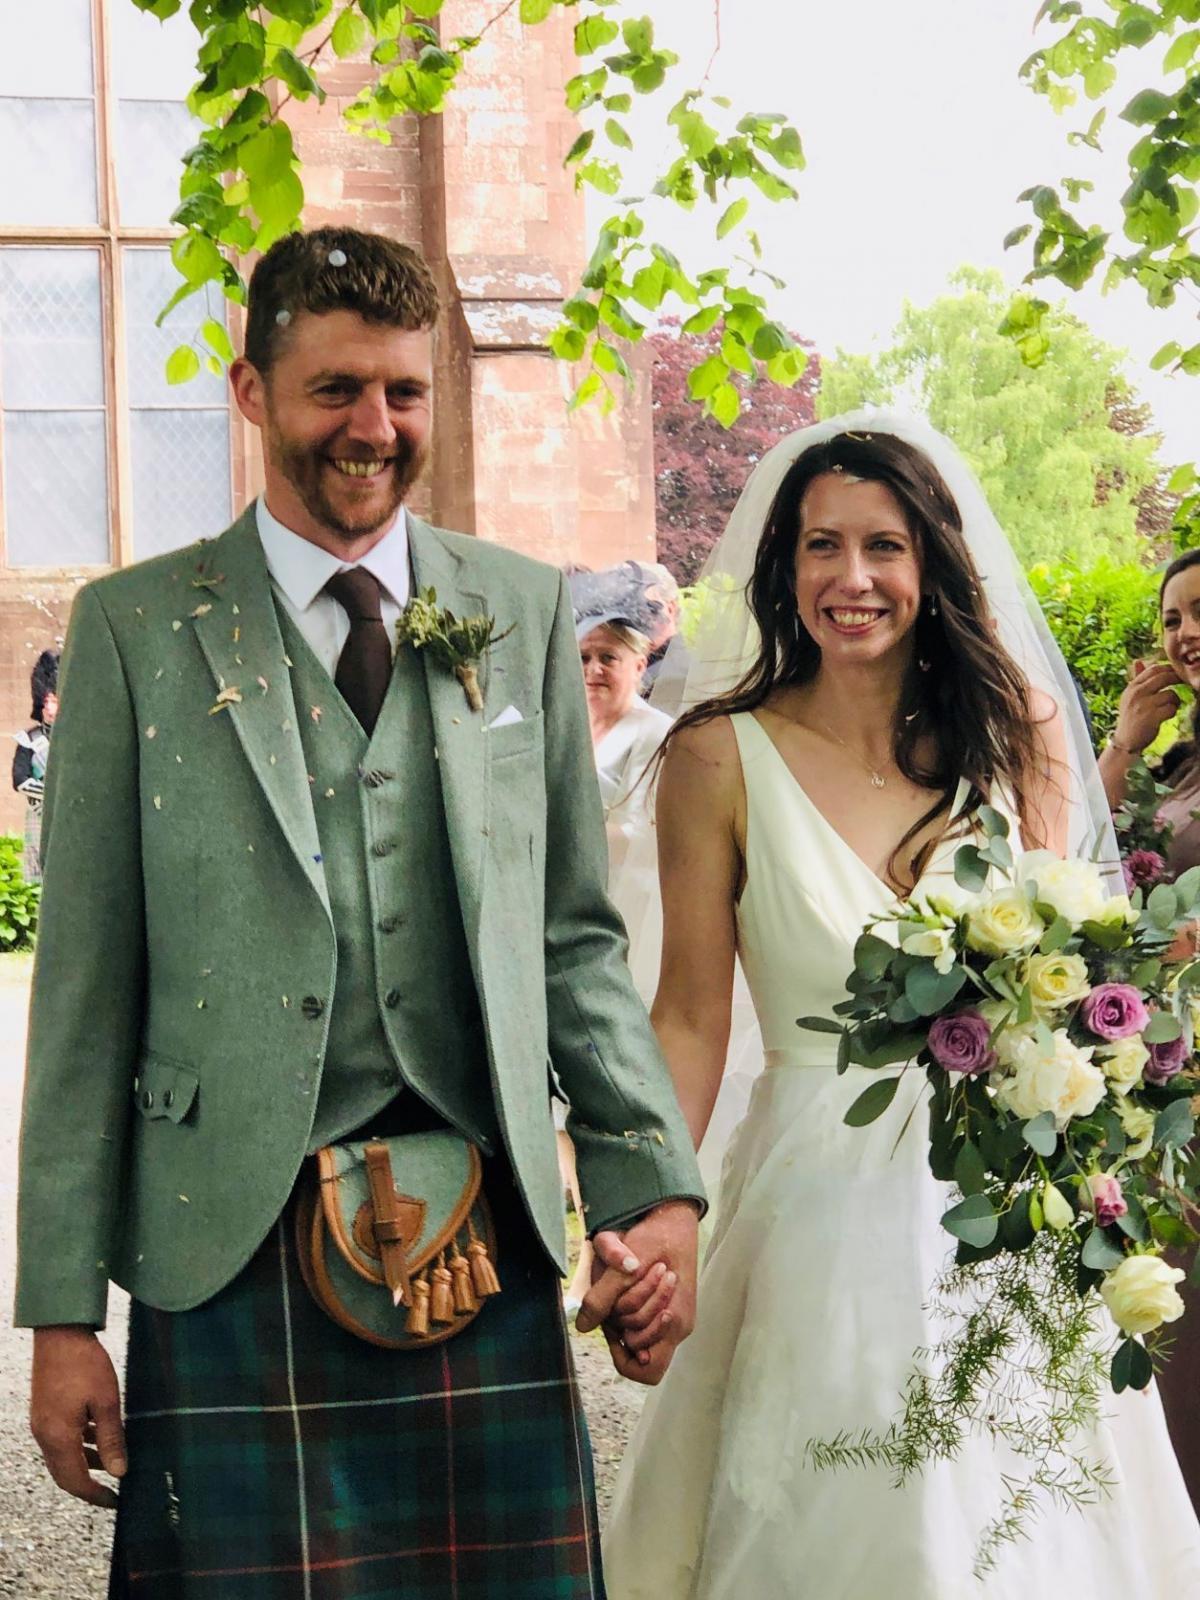 About to celebrate their first anniversary, the wedding of Amy J Maitland Gardner, of Culdees, Muthill, and Ian A Reid, of Isle Cottage, Methven